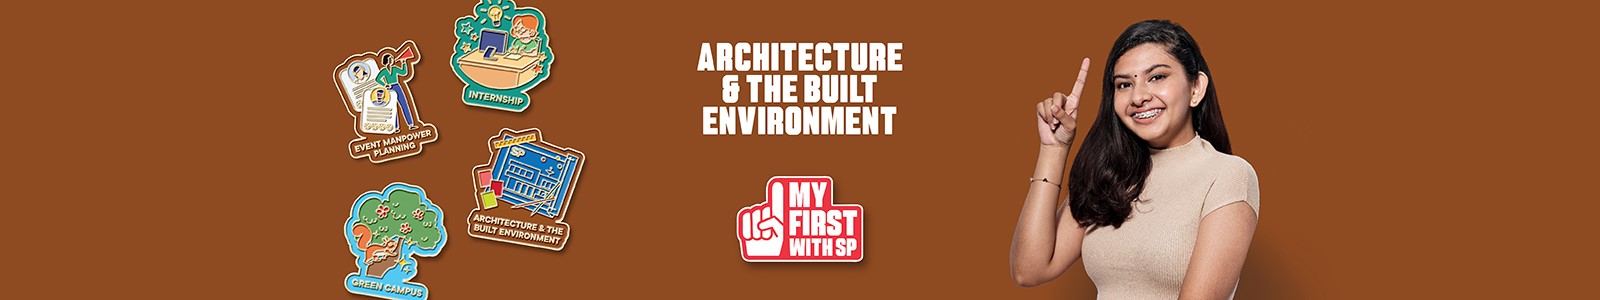 Architecture and the Built Environment Banner